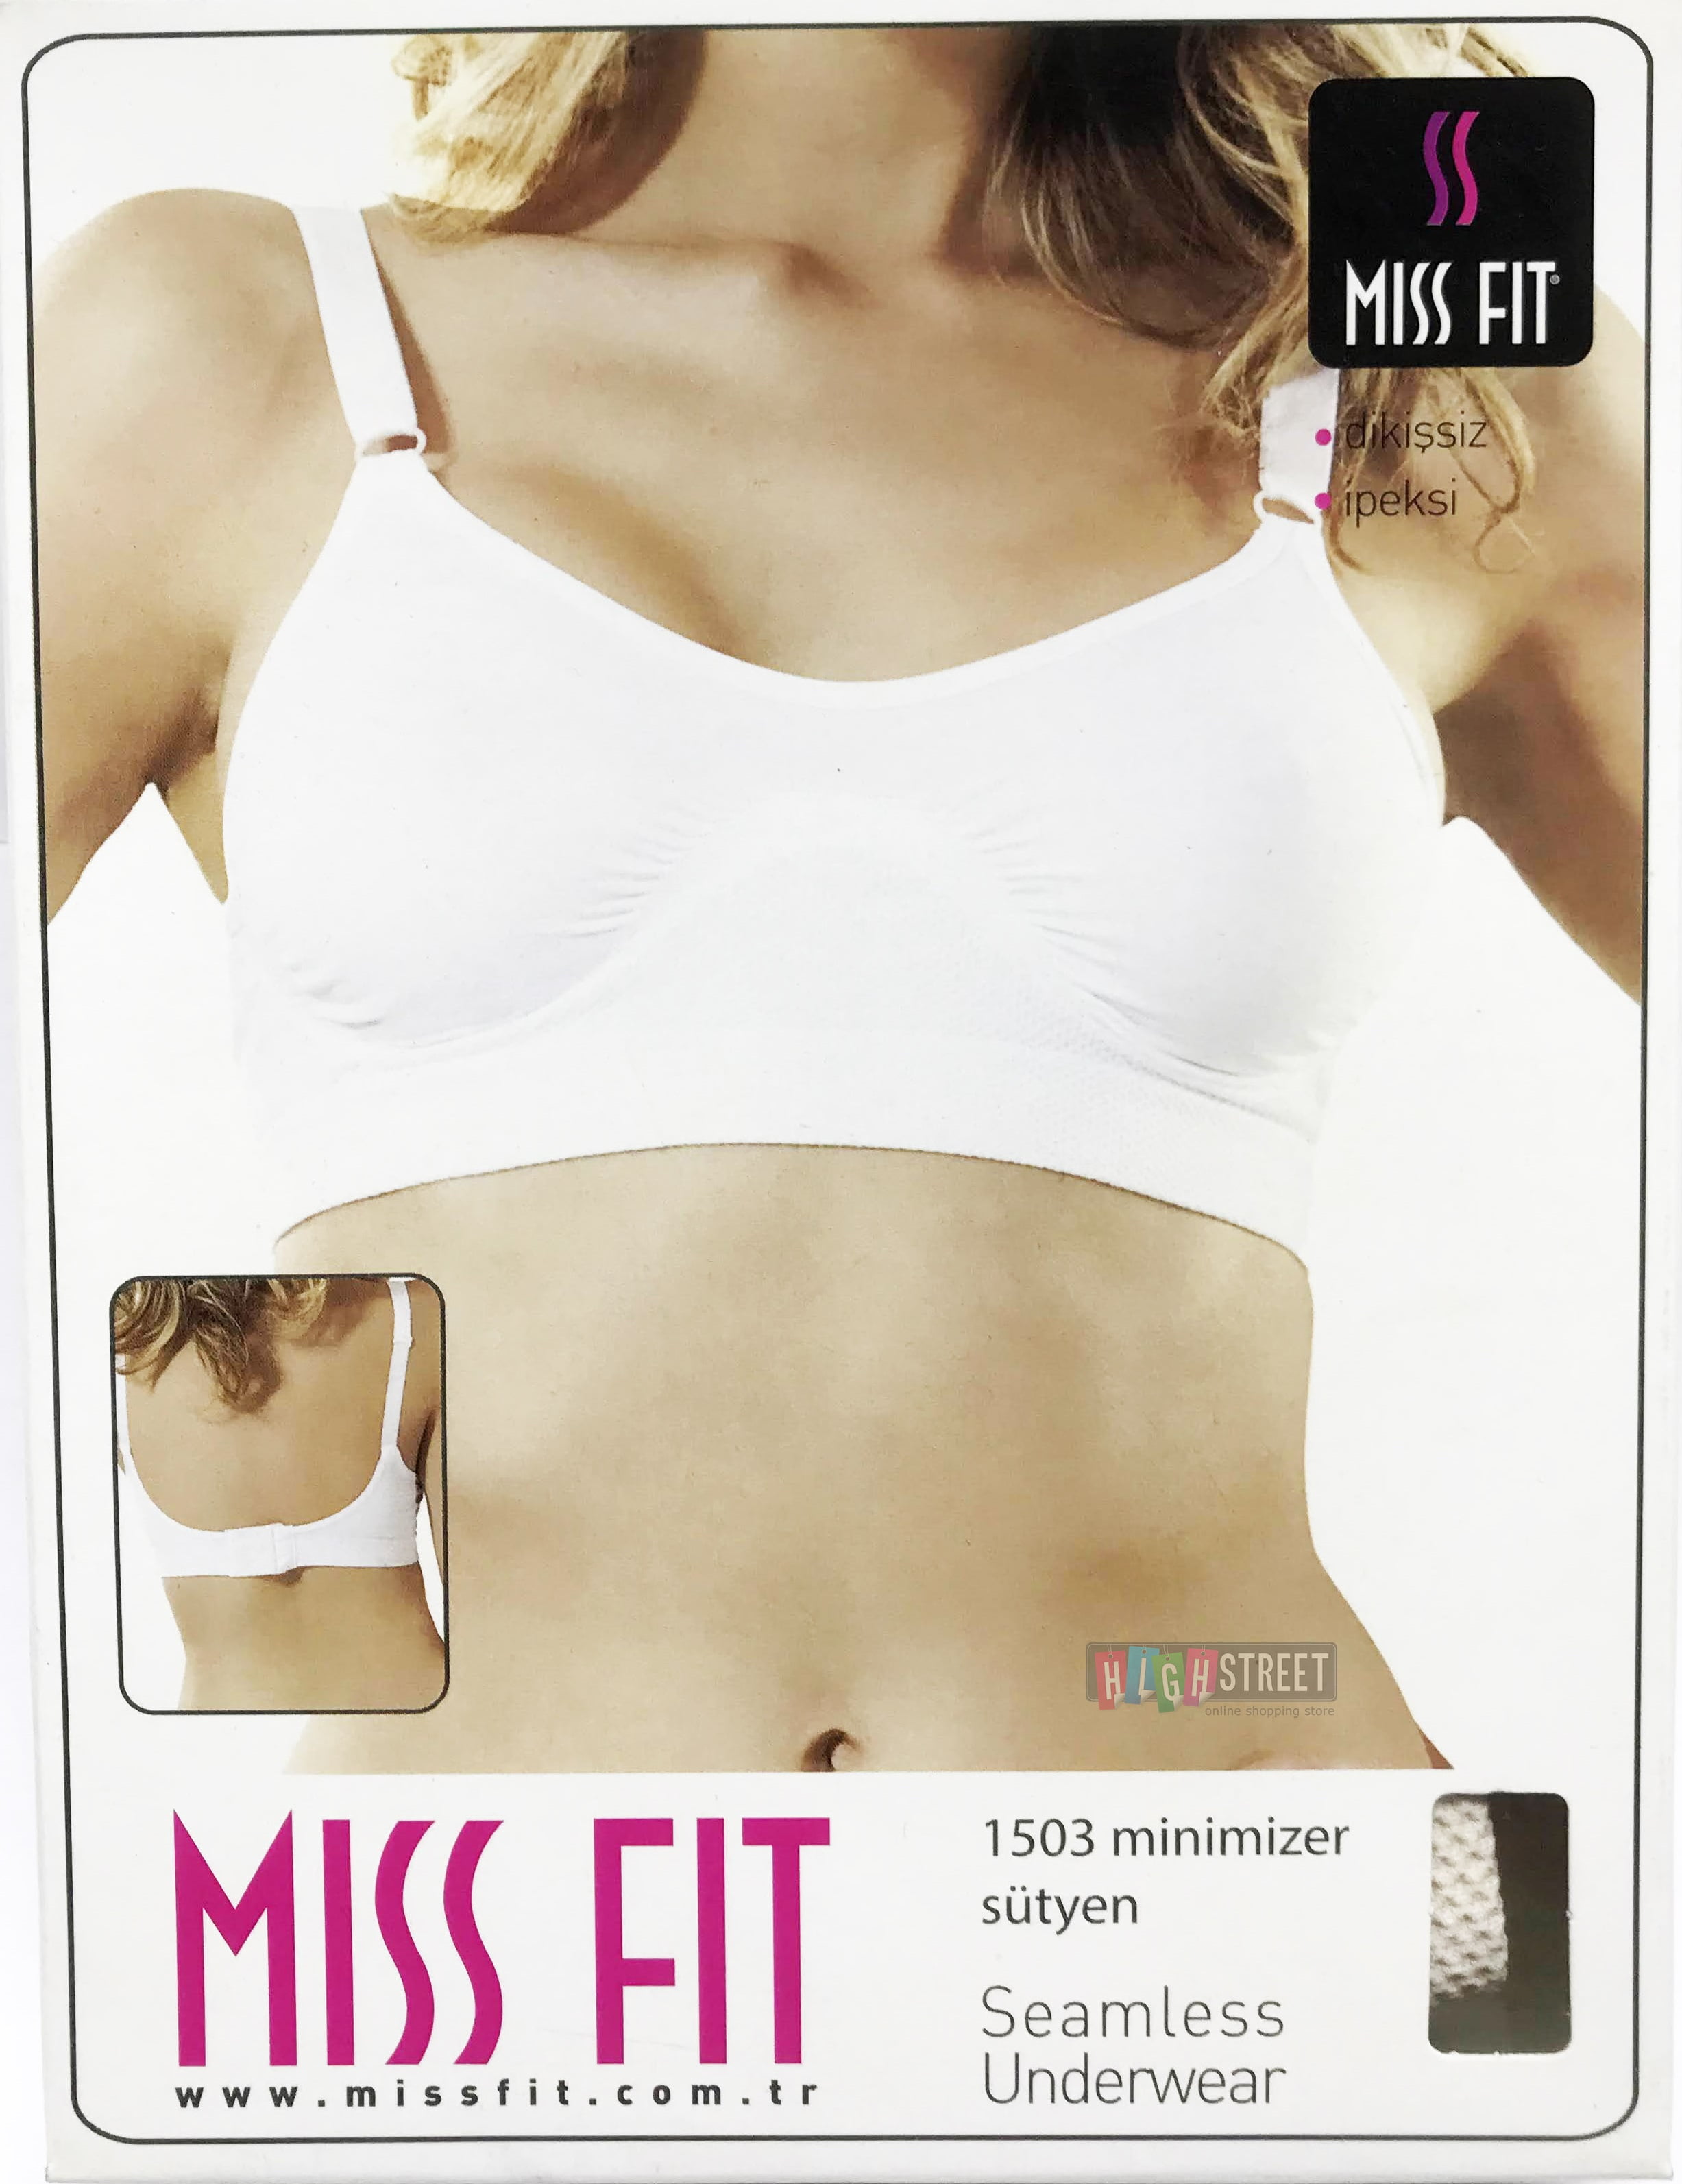 MISS FIT- Women Minimiser Shaping Bra with Adjustable Straps-1503